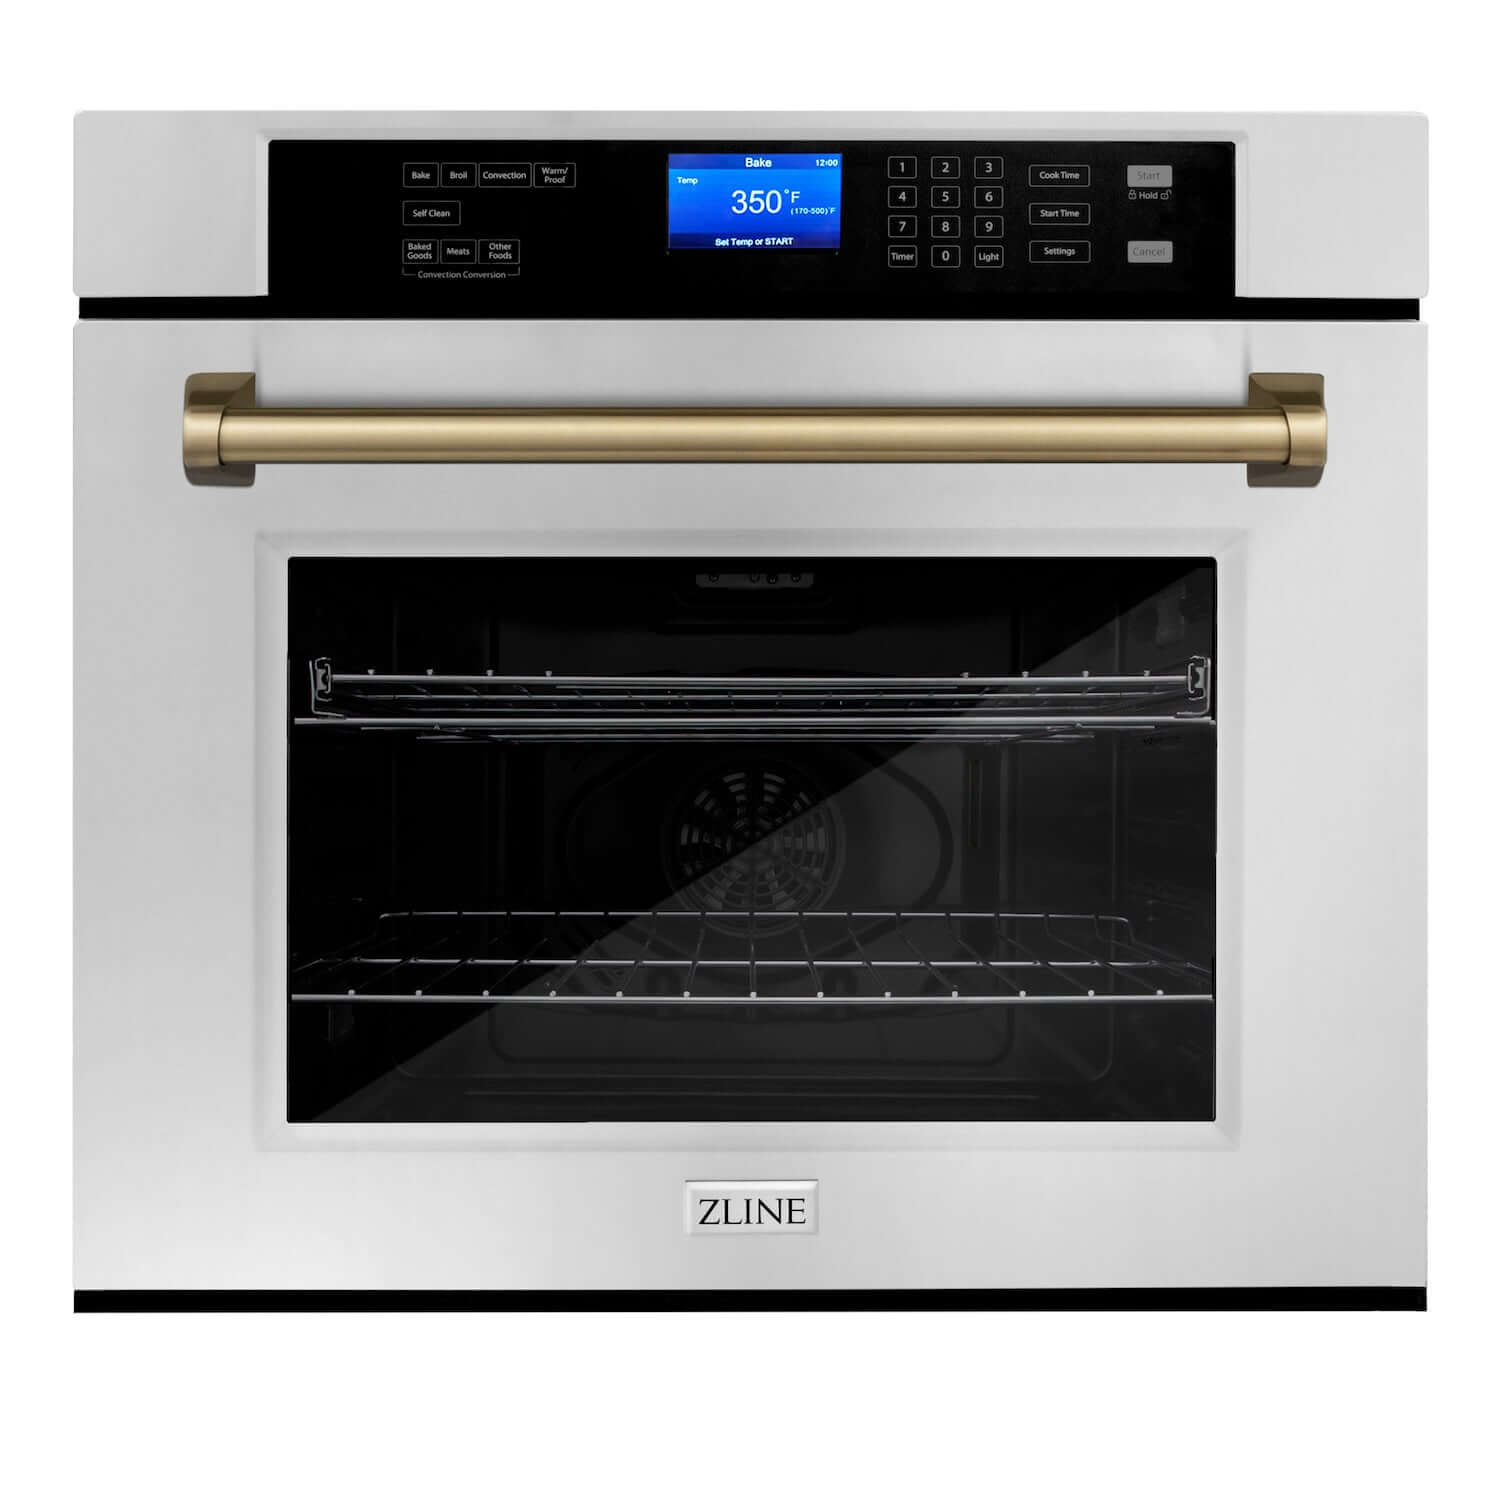 ZLINE Autograph Edition 30 in. Electric Single Wall Oven with Self Clean and True Convection in Stainless Steel and Champagne Bronze Accents (AWSZ-30-CB)